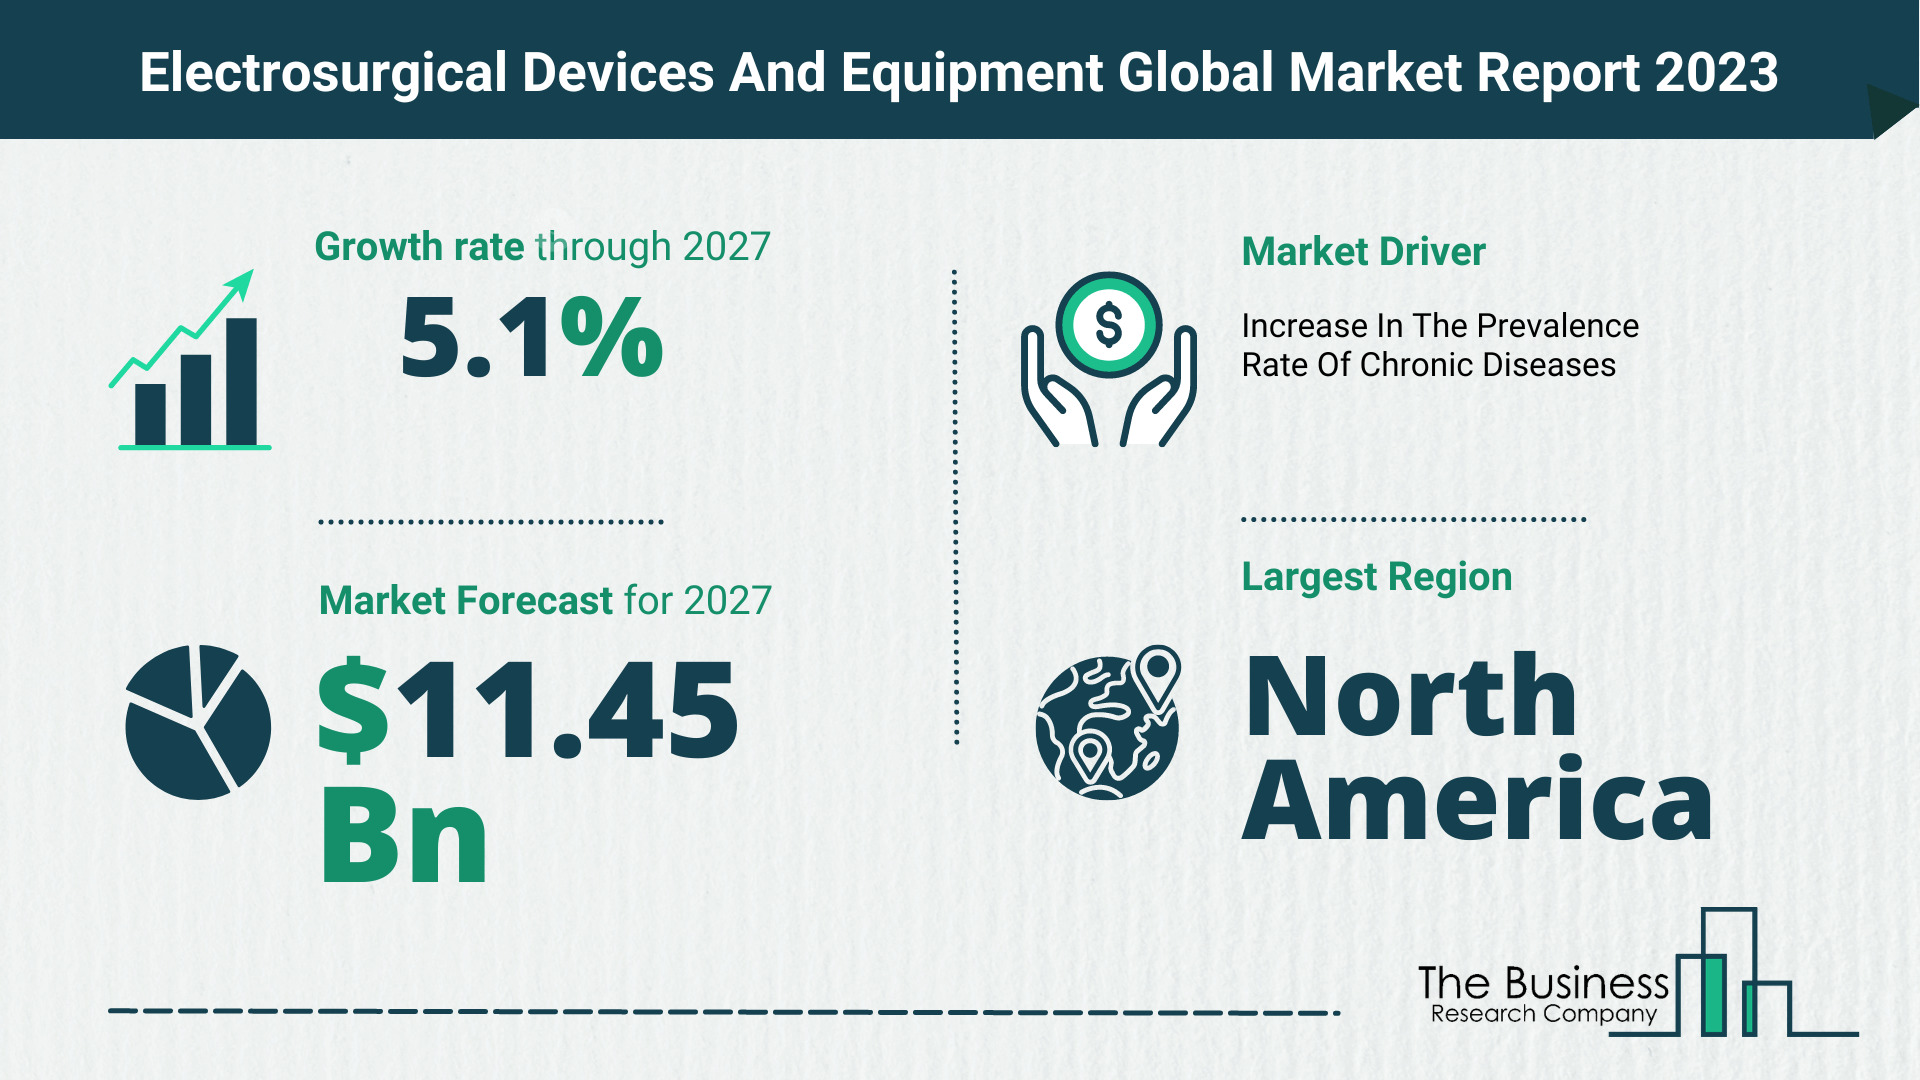 Global Electrosurgical Devices And Equipment Market